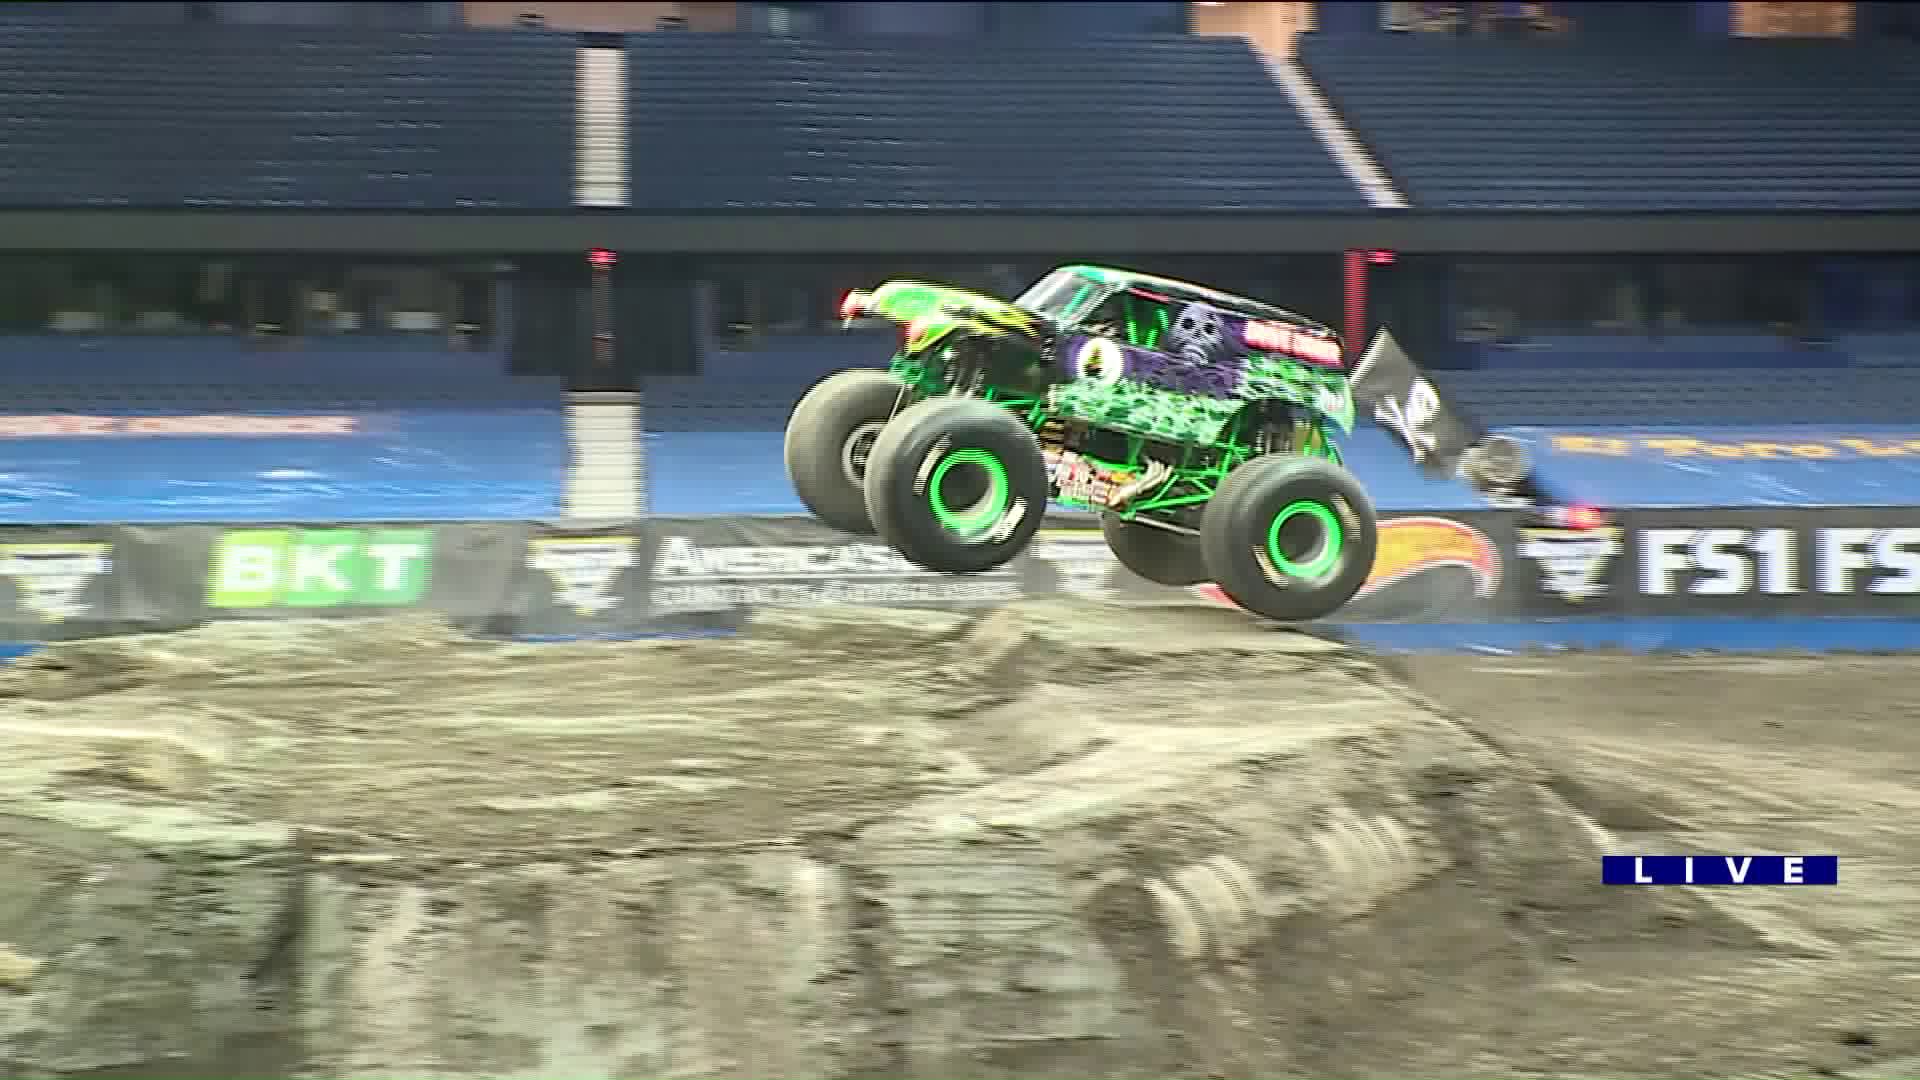 Around Town checks out Monster Jam